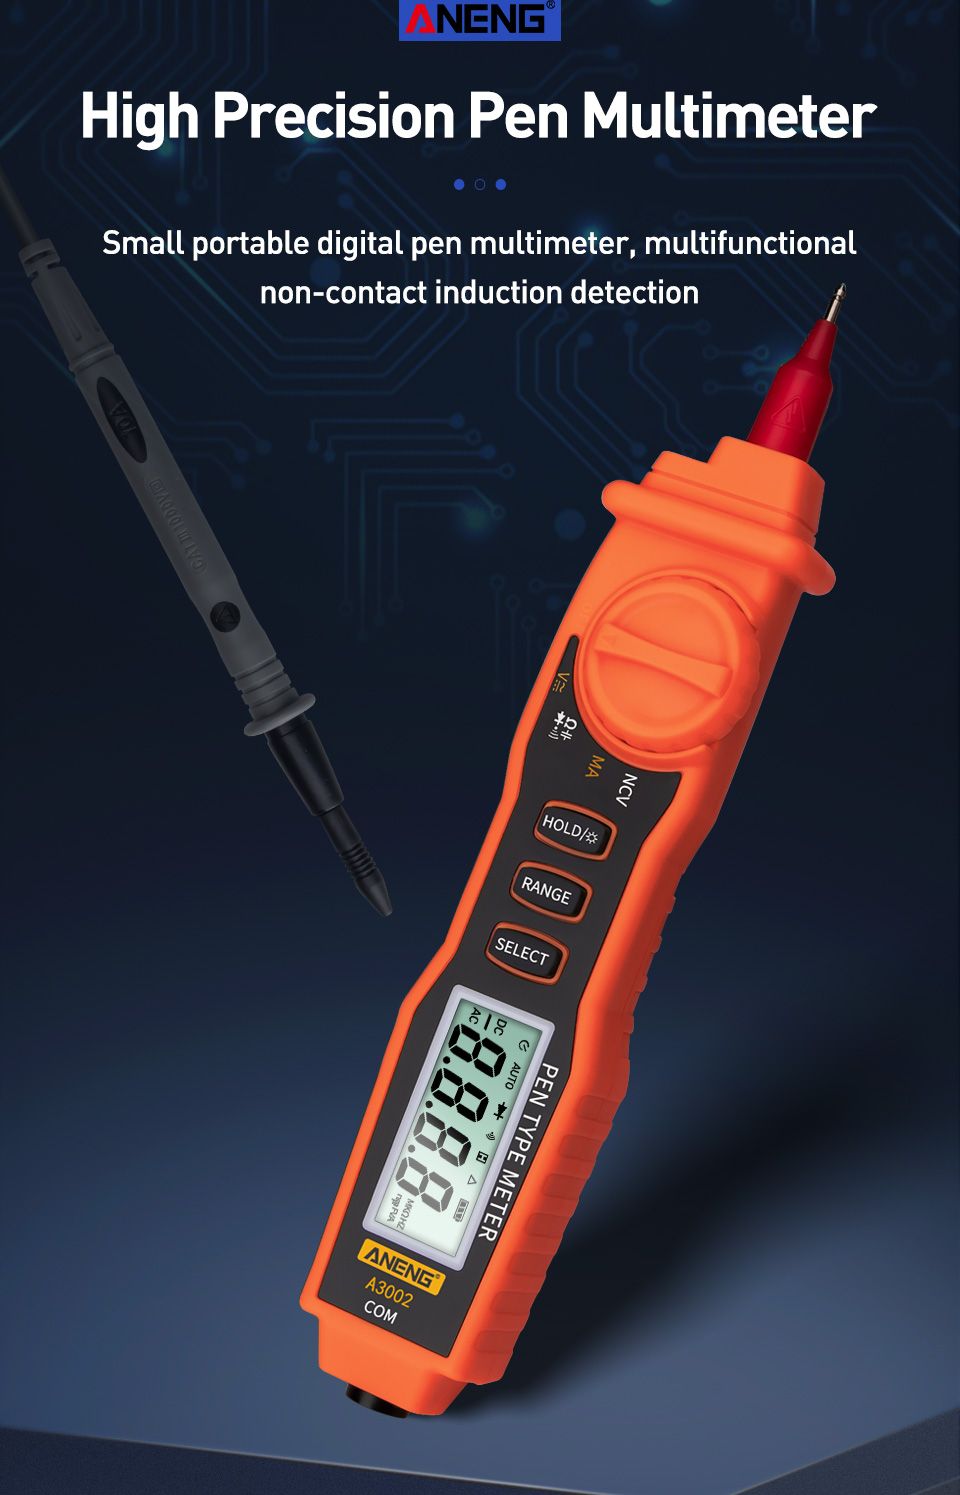 ANENG-A3002-Digital-Multimeter-Pen-Type-4000-Counts-with-Non-Contact-ACDC-Voltage-Resistance-Diode-C-1685310